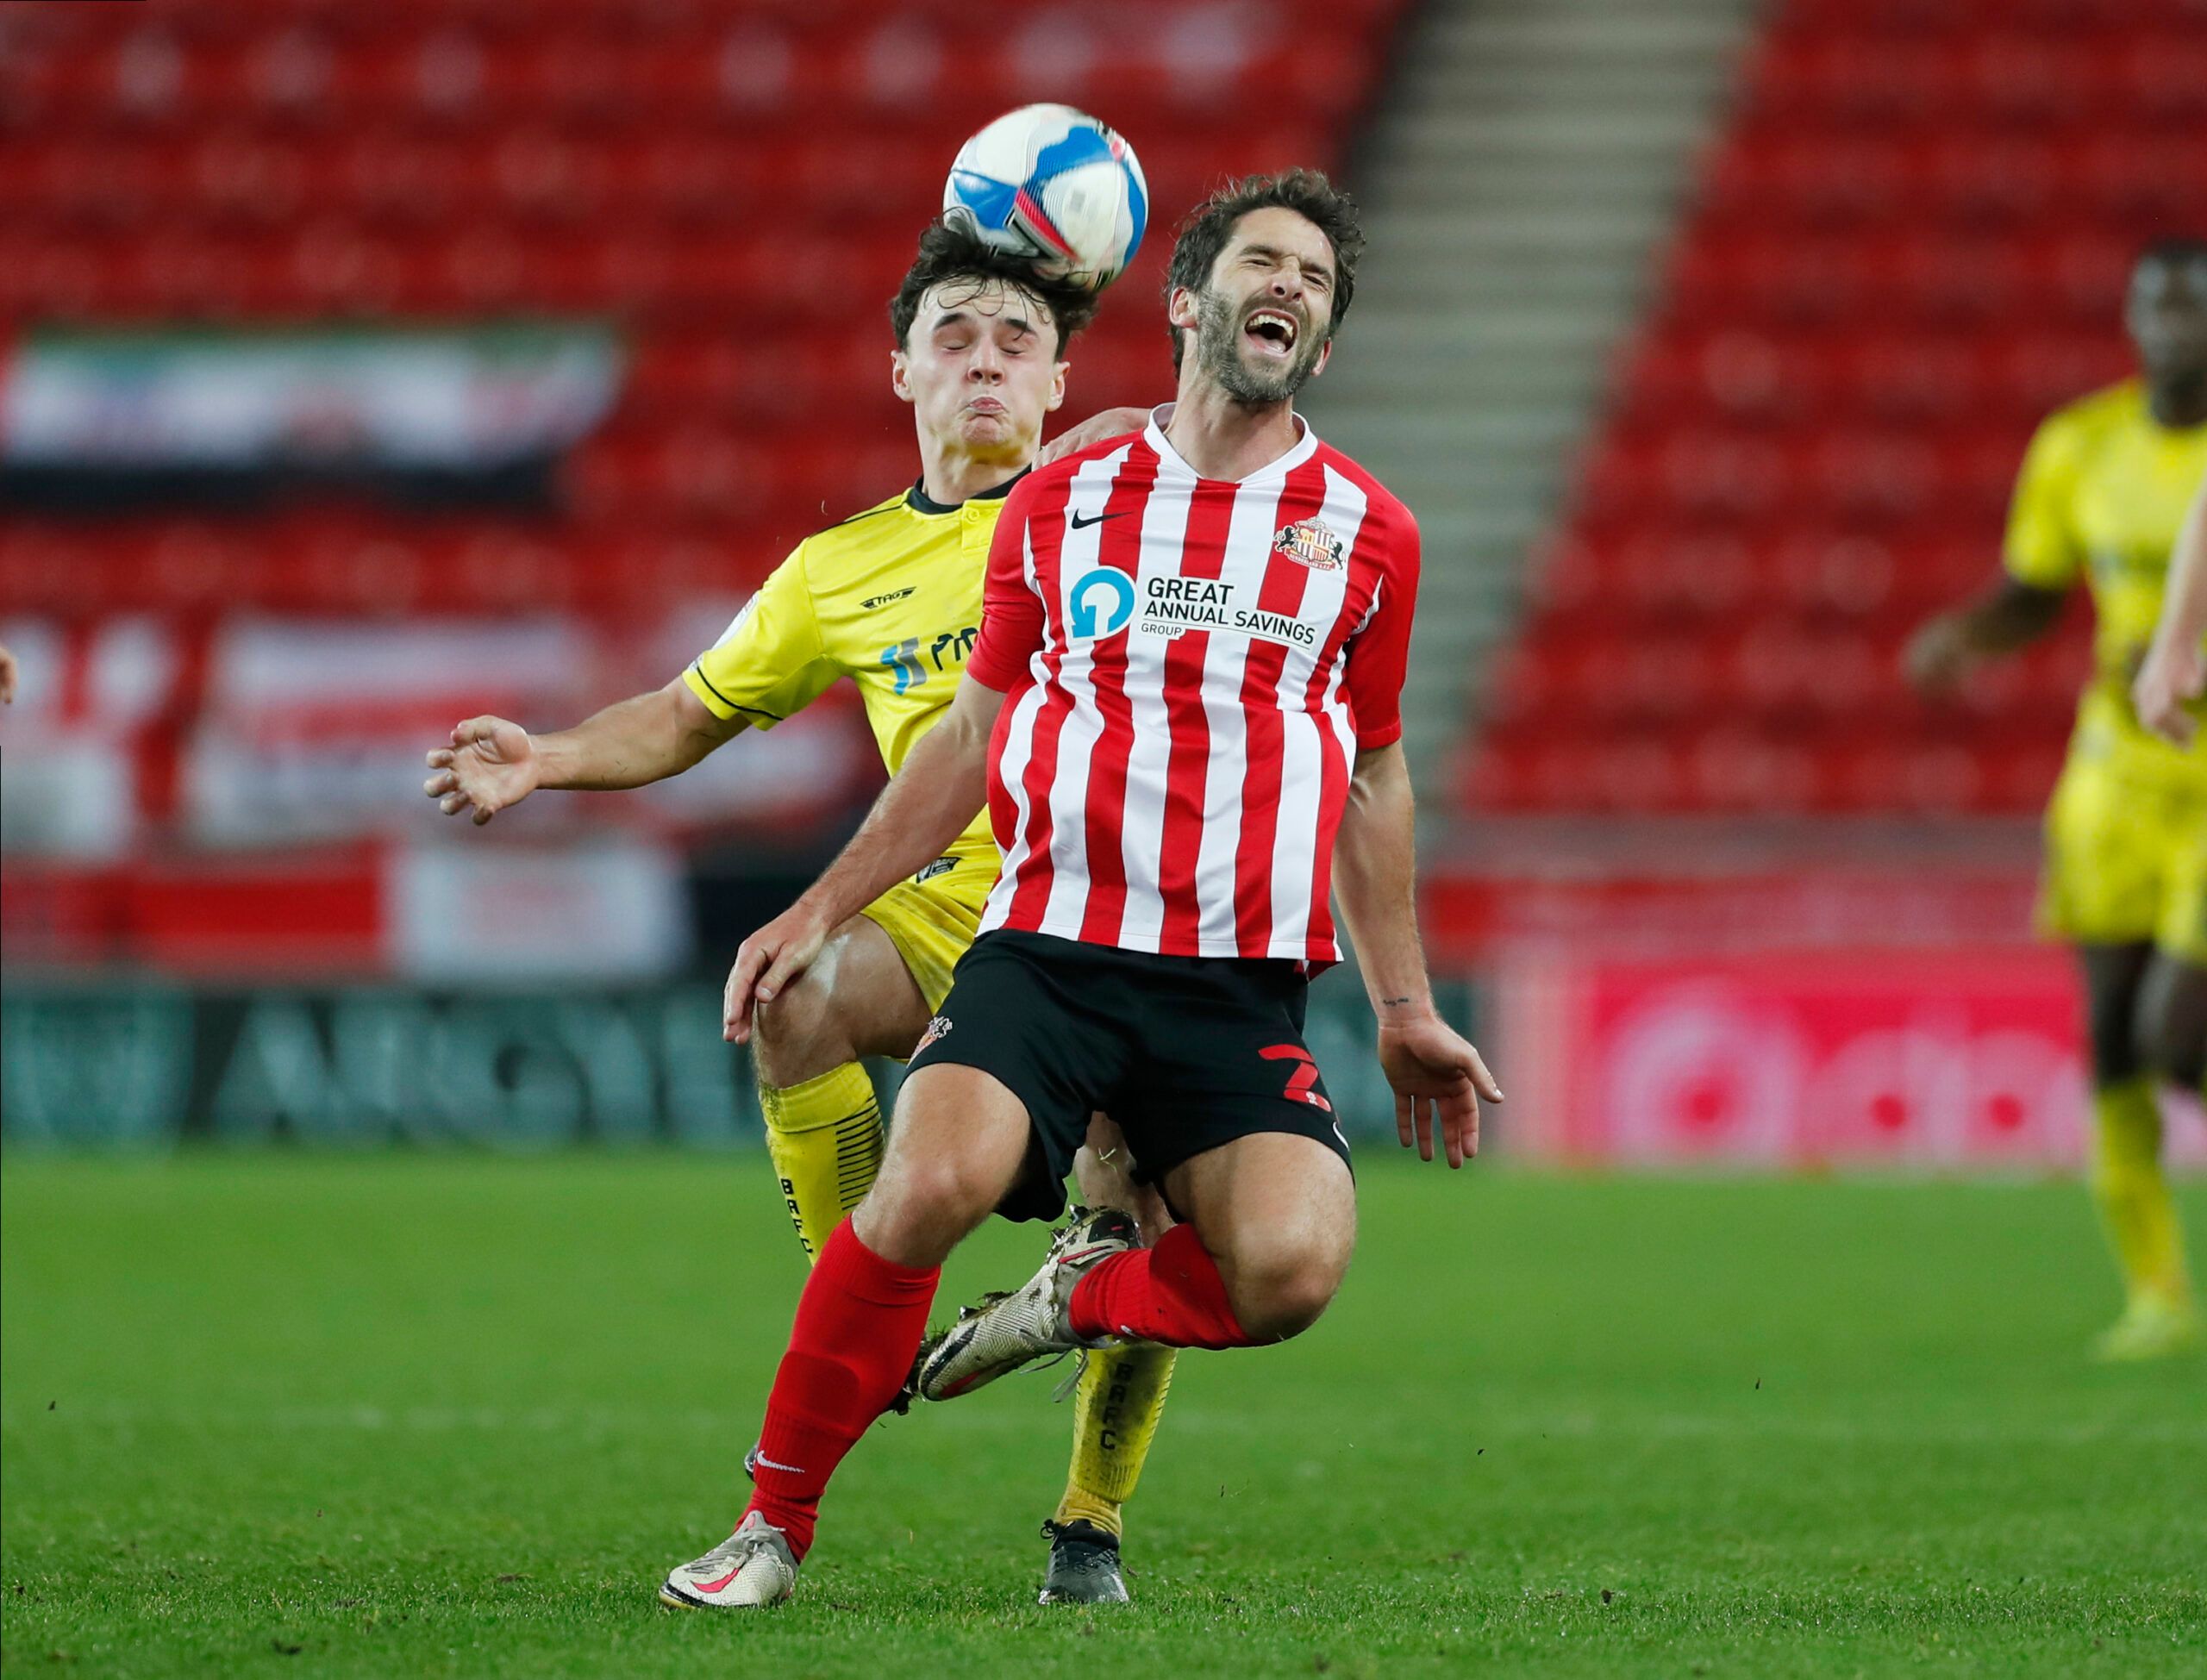 Soccer Football - League One - Sunderland v Burton Albion - Stadium of Light, Sunderland, Britain - December 1, 2020 Sunderland's Will Grigg in action with Burton Albion's Ciaran Gilligan Action Images/Lee Smith EDITORIAL USE ONLY. No use with unauthorized audio, video, data, fixture lists, club/league logos or 'live' services. Online in-match use limited to 75 images, no video emulation. No use in betting, games or single club /league/player publications.  Please contact your account representa